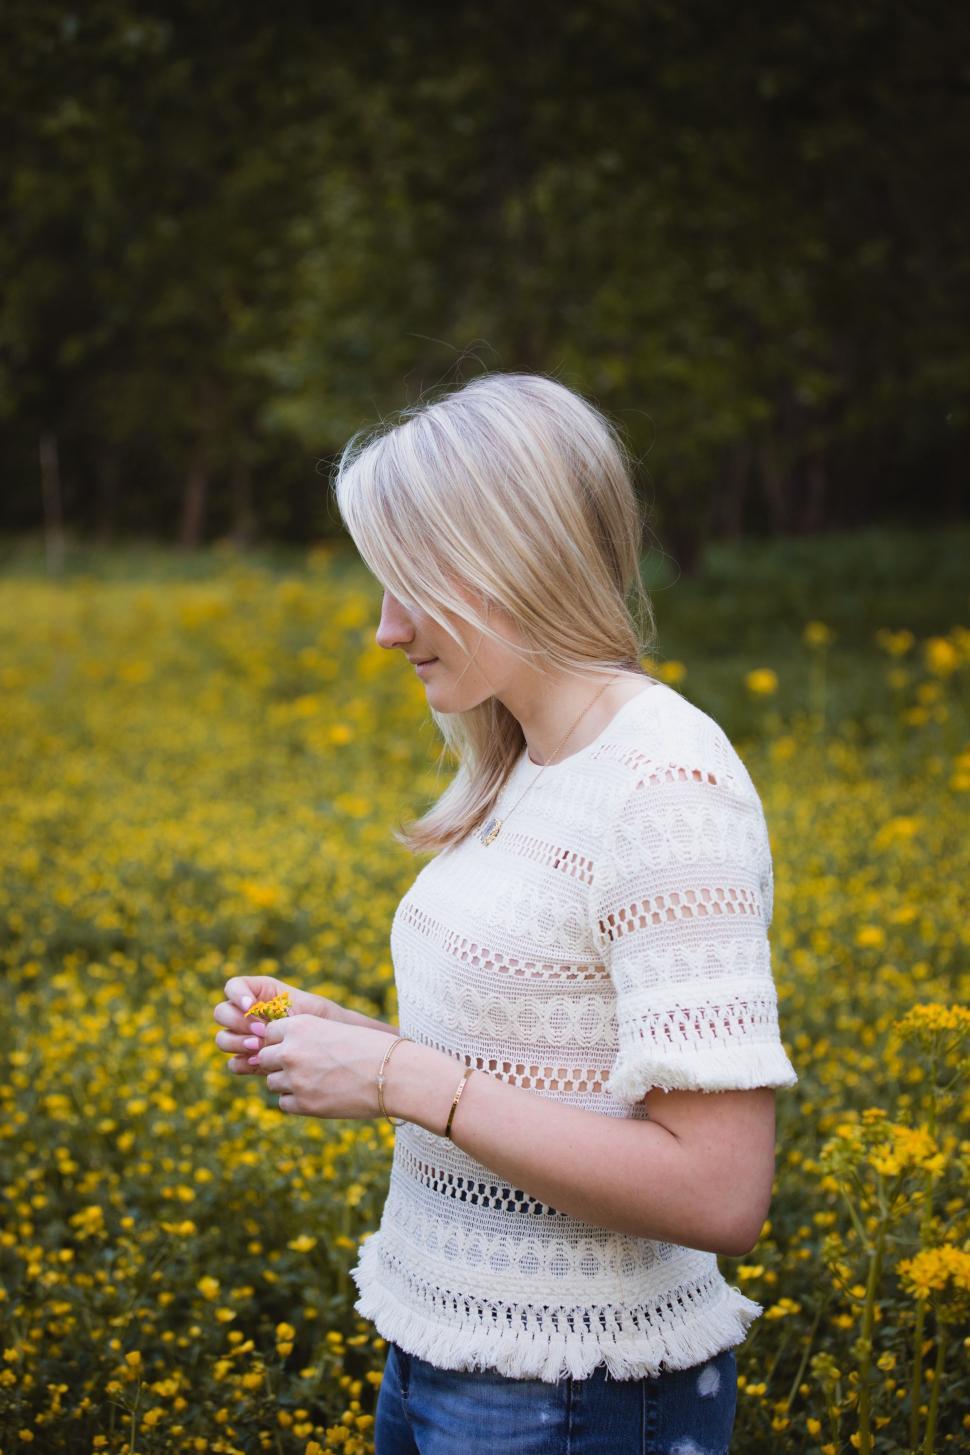 Free Image of Woman Standing in Field of Yellow Flowers 